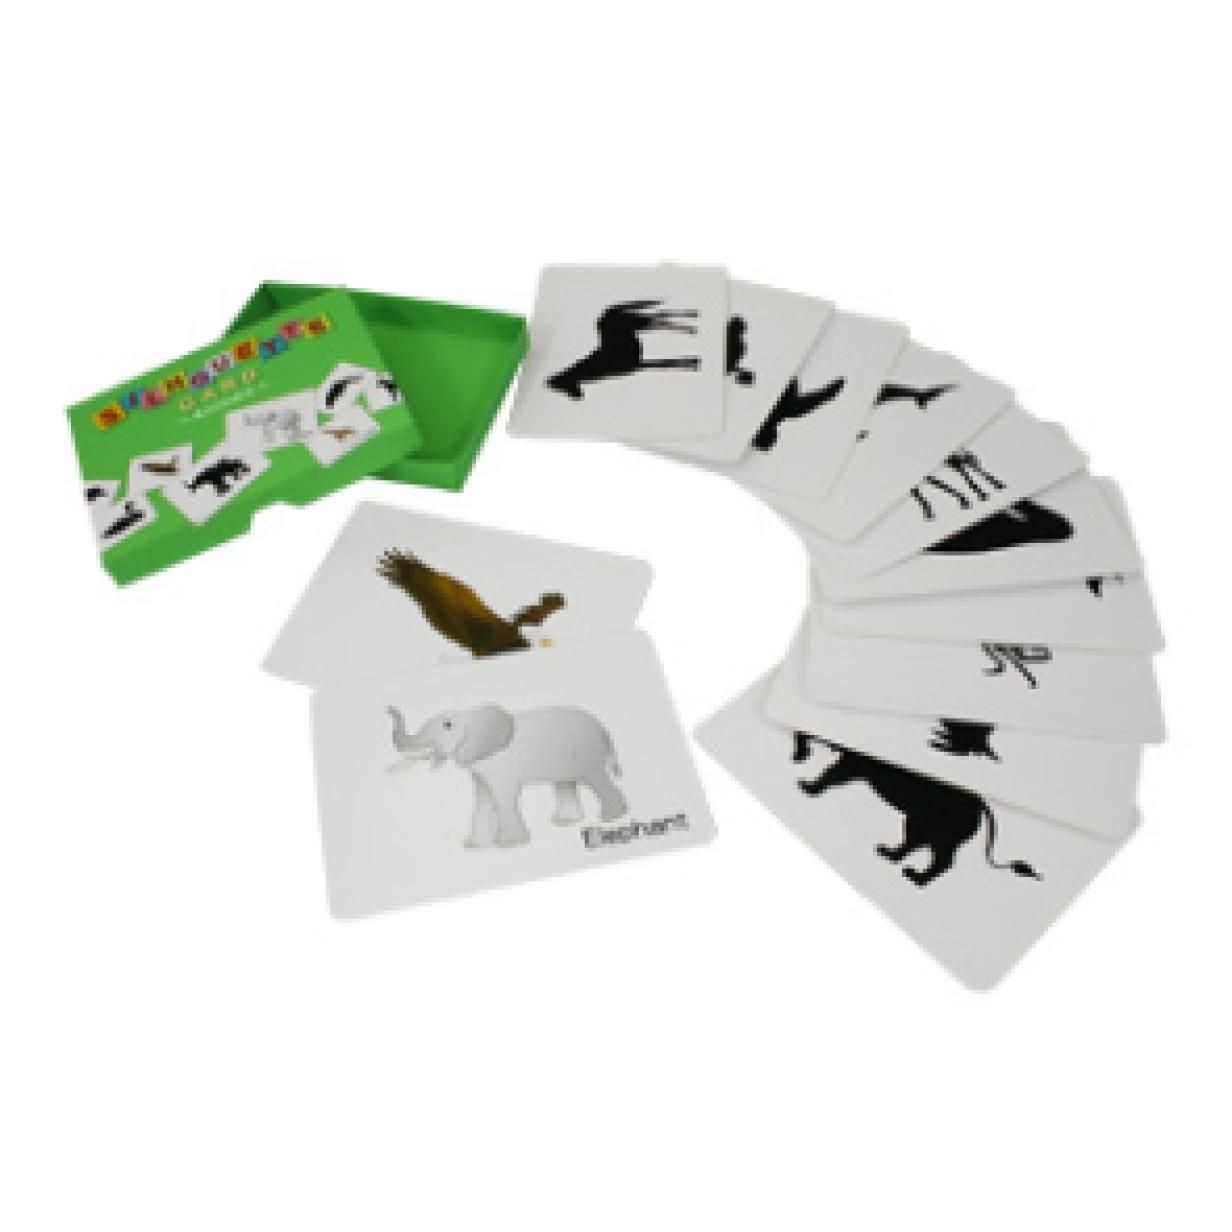 Papercraft Canon Creative Park Silhouette Card Animals toys Paper Craft Educational Game